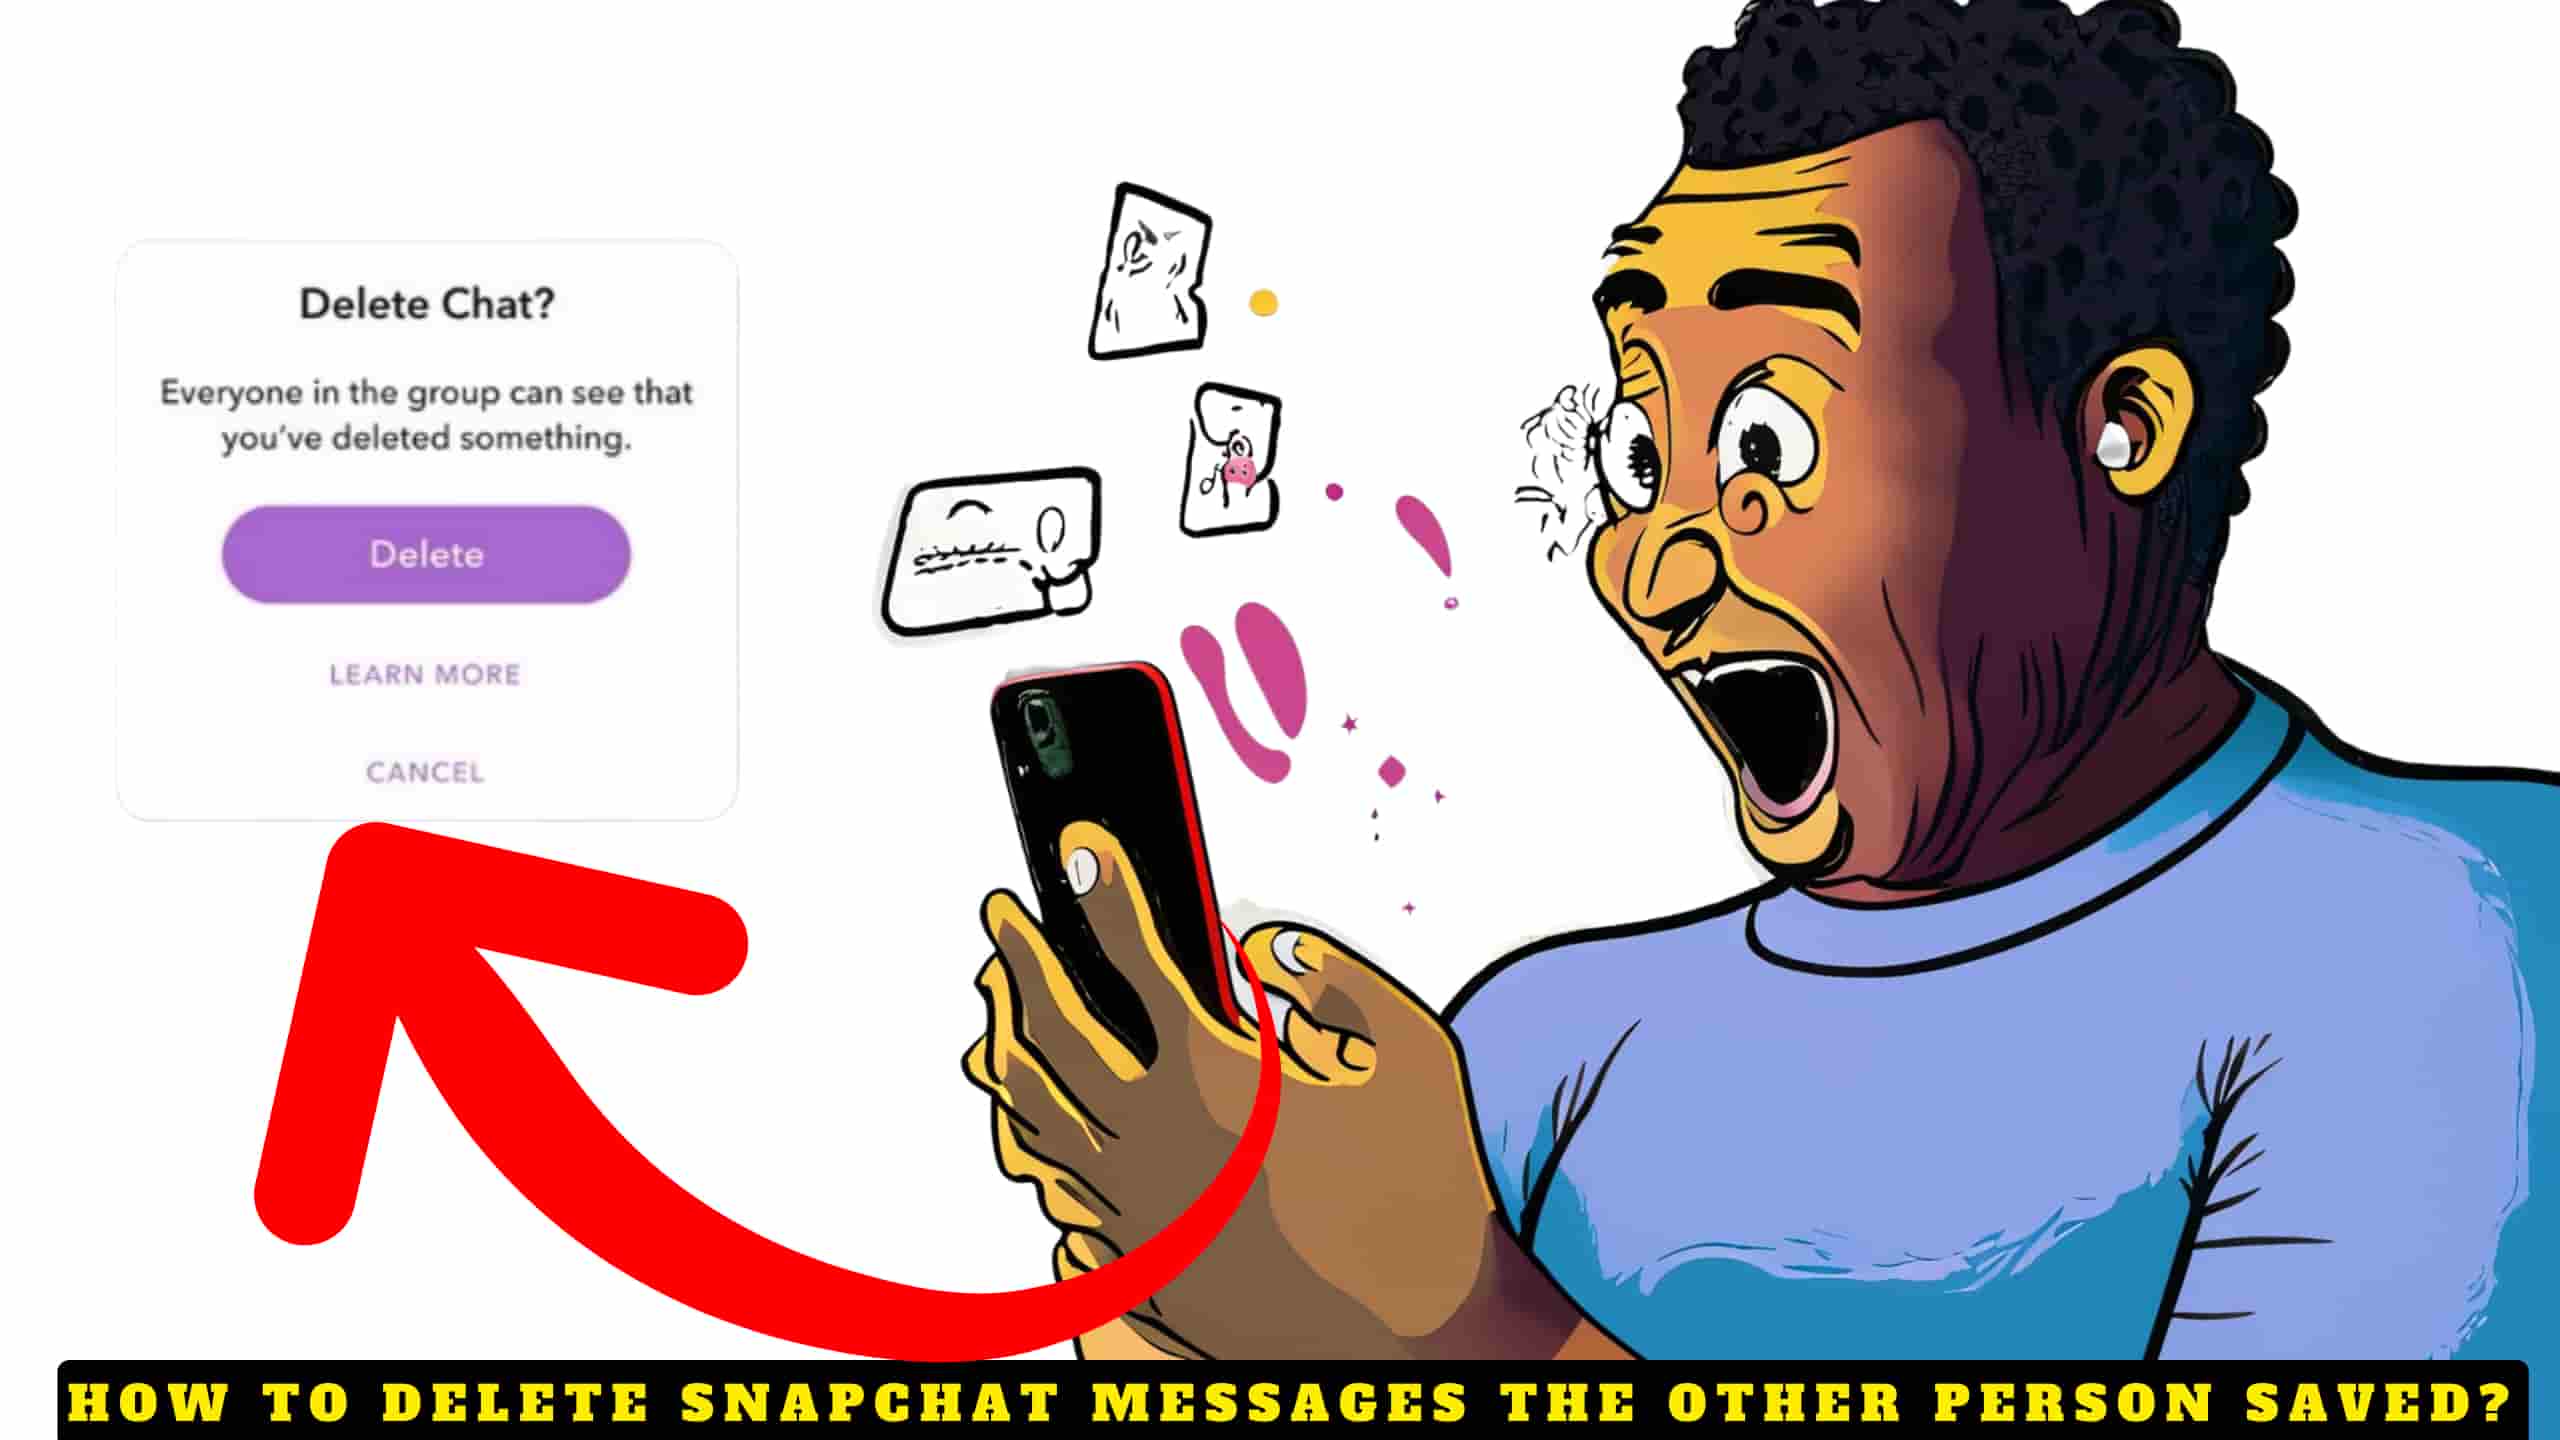 How to Delete Snapchat Messages The Other Person Saved?